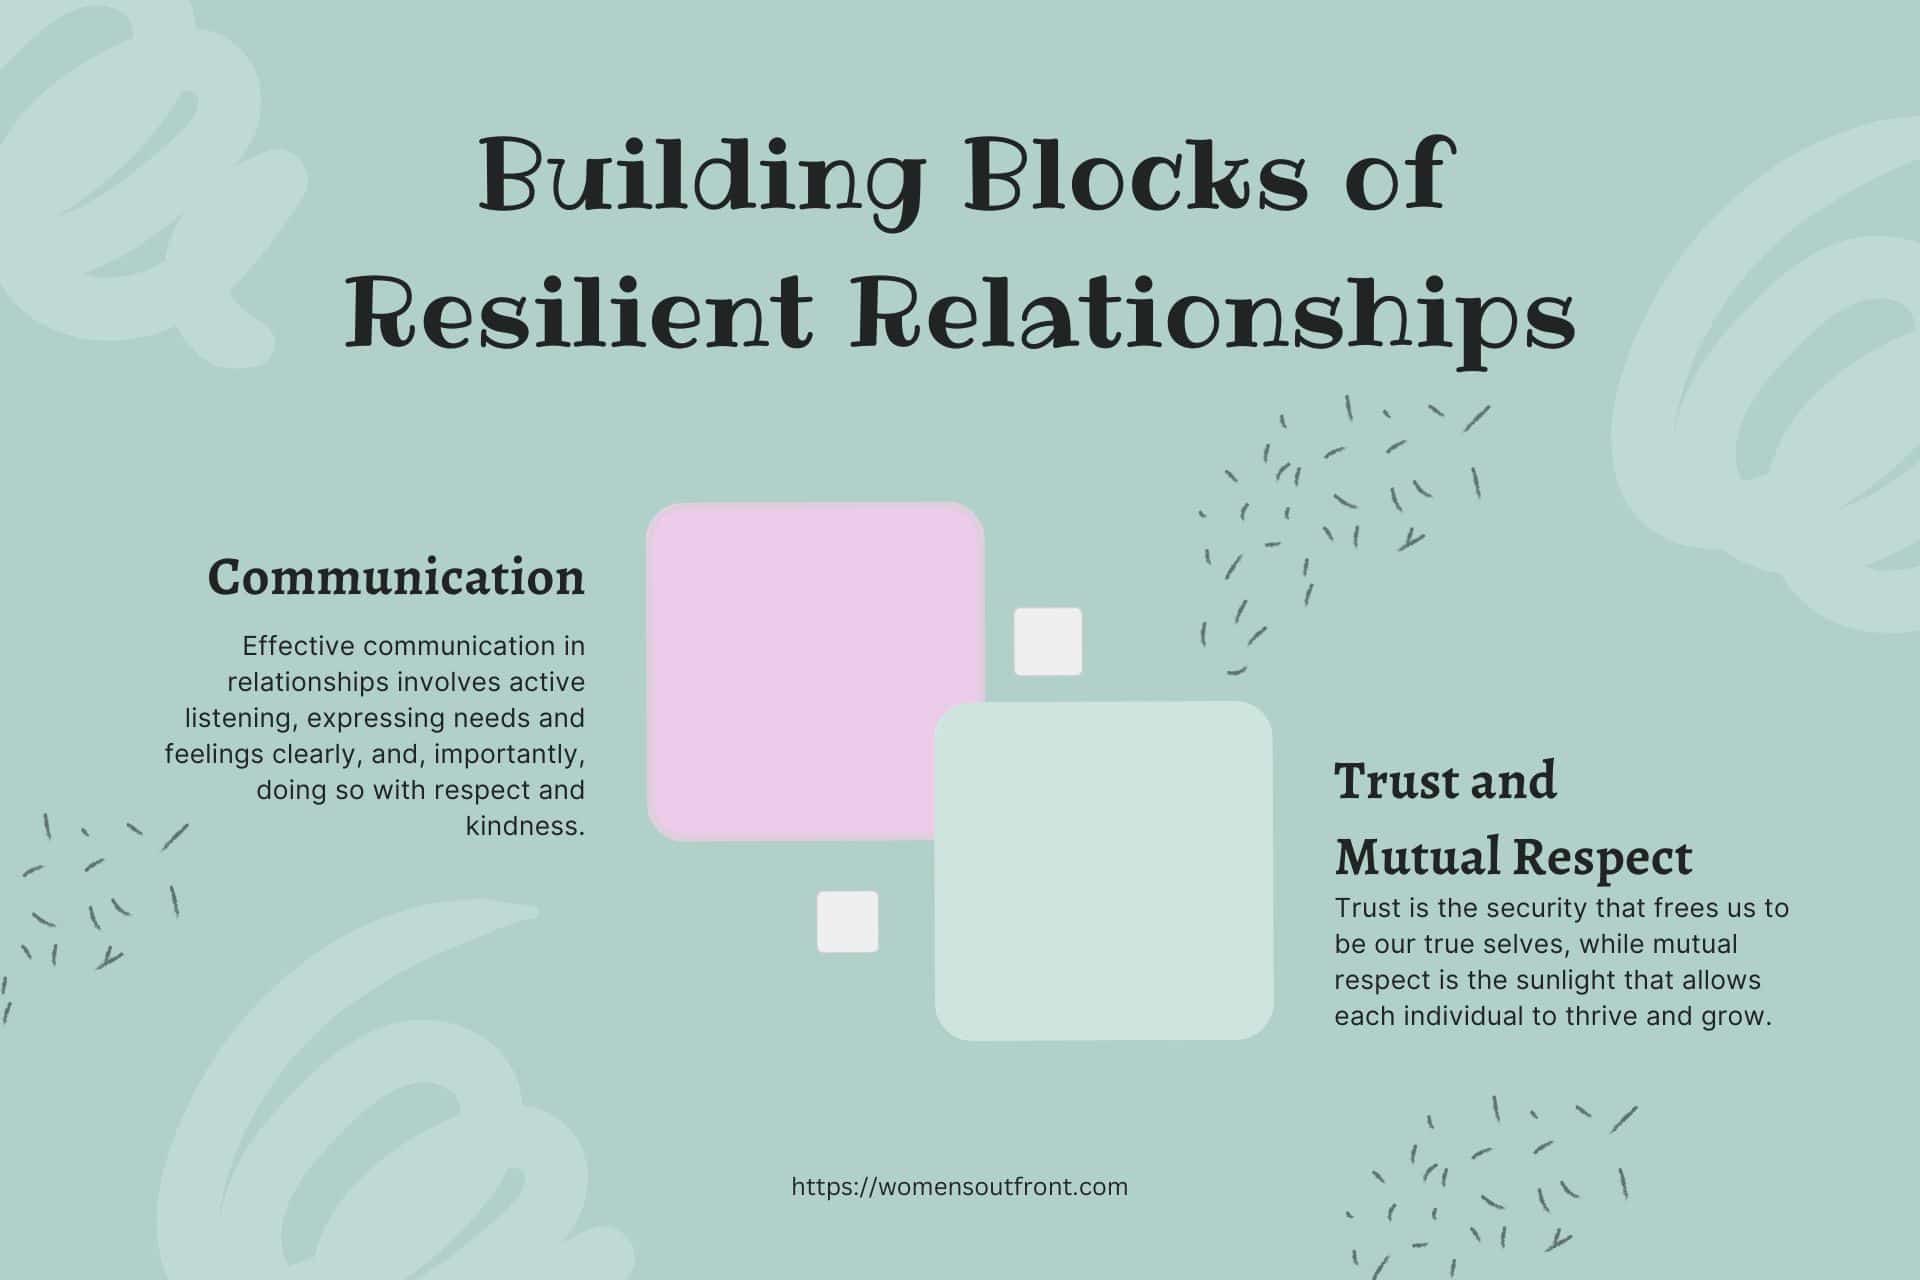 building blocks of resilient relationships infographic